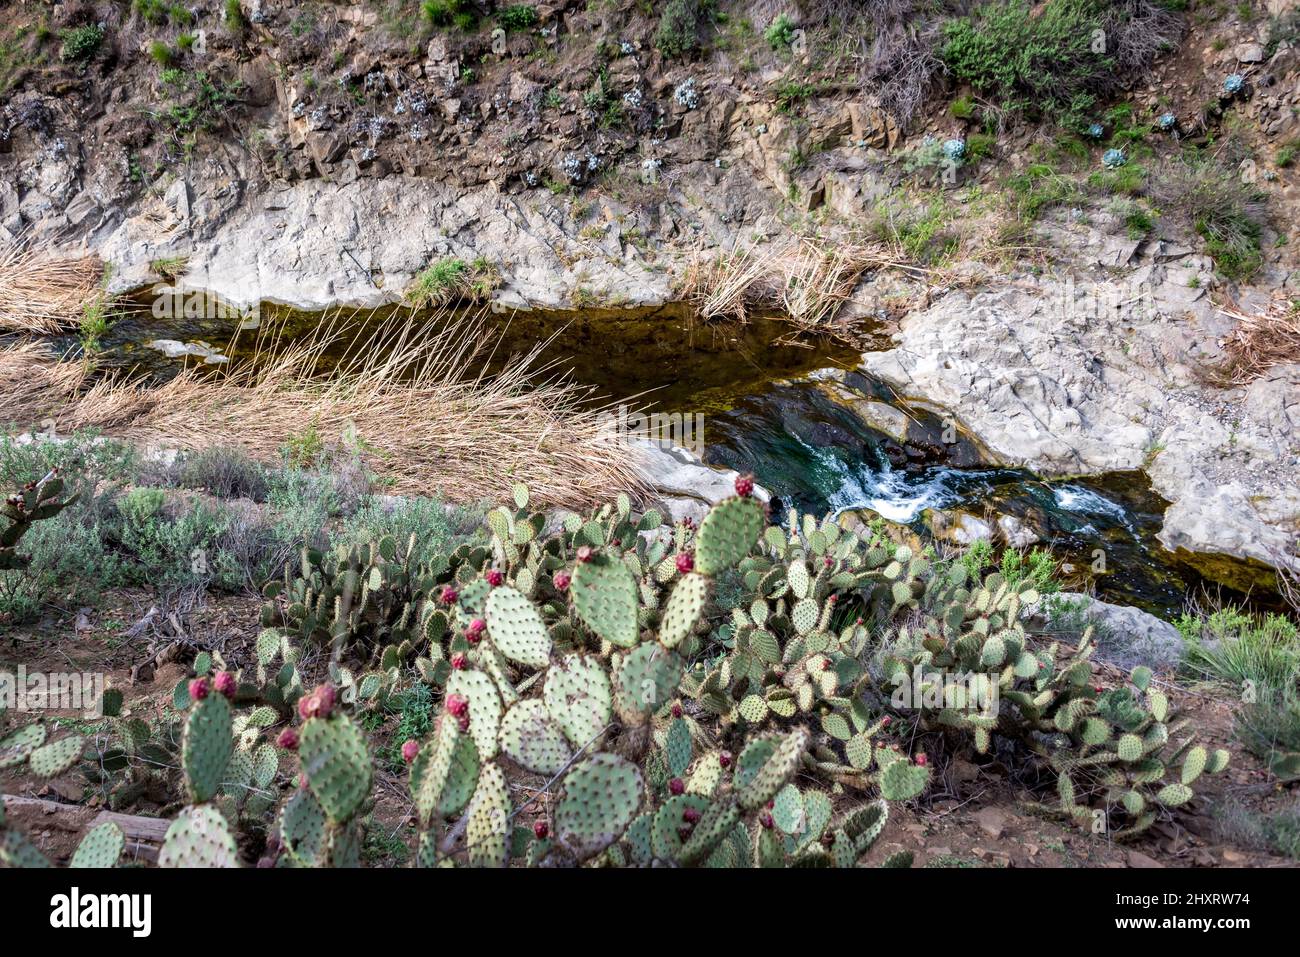 Prickly pear cacti grow beside flowing North Fork Arroyo Conejo, just above Paradise Falls, a popular hiking destination in southern California Stock Photo